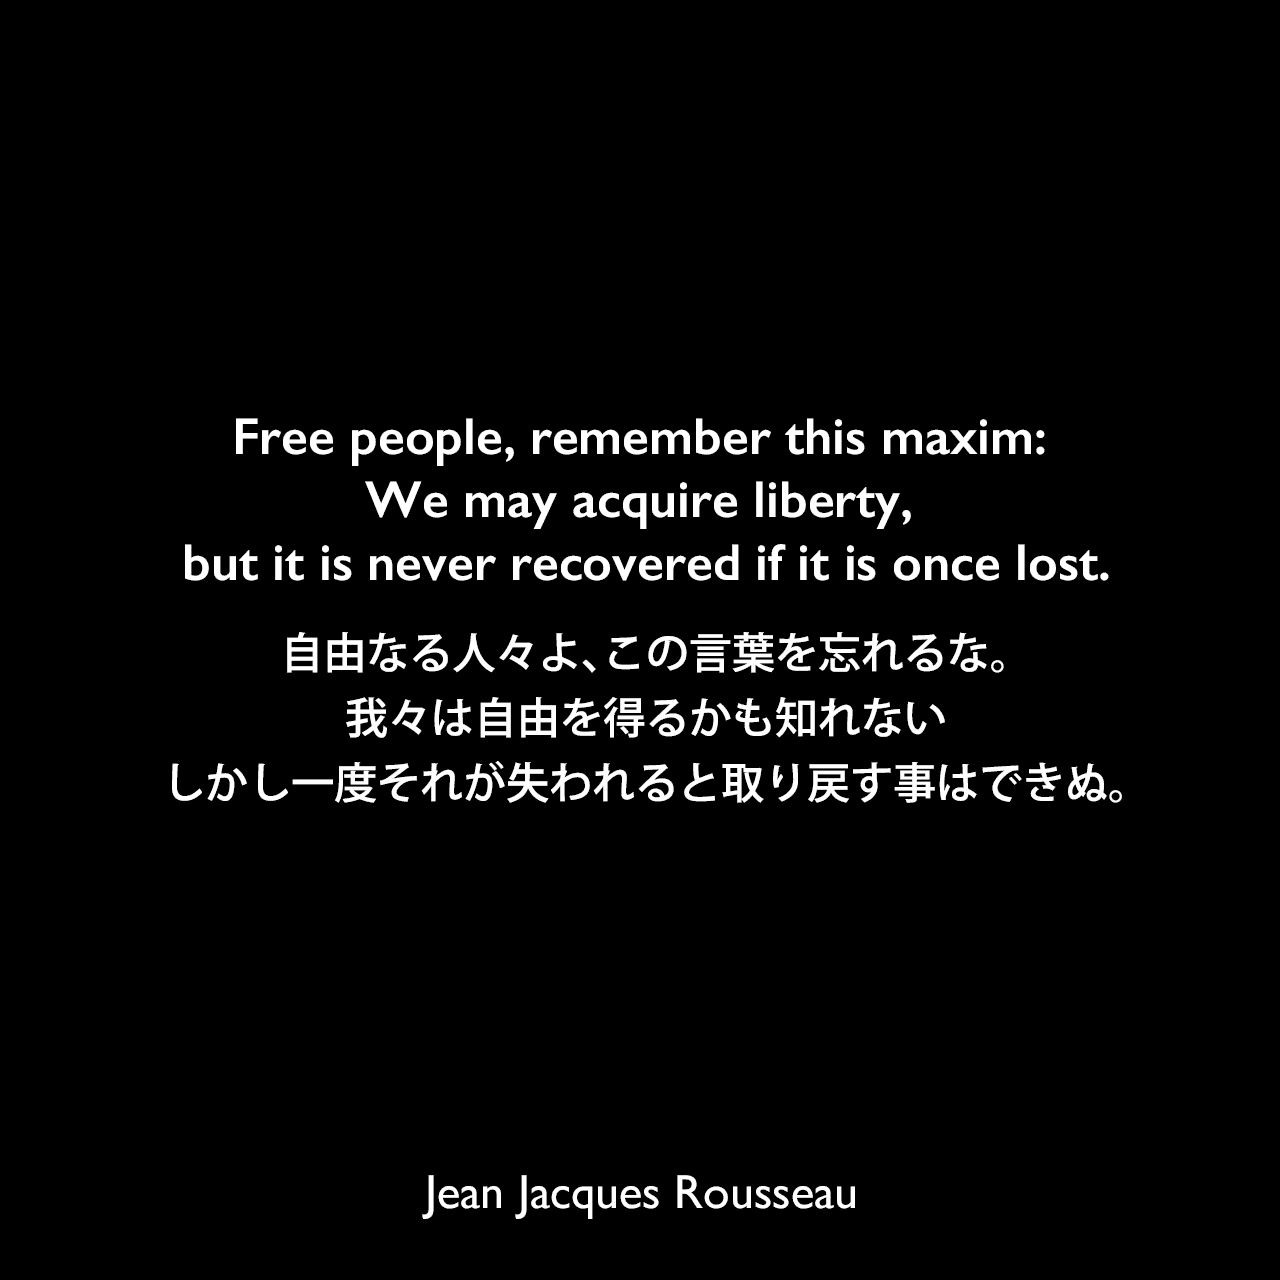 Free people, remember this maxim: We may acquire liberty, but it is never recovered if it is once lost.自由なる人々よ、この言葉を忘れるな。我々は自由を得るかも知れない、しかし一度それが失われると取り戻す事はできぬ。Jean Jacques Rousseau